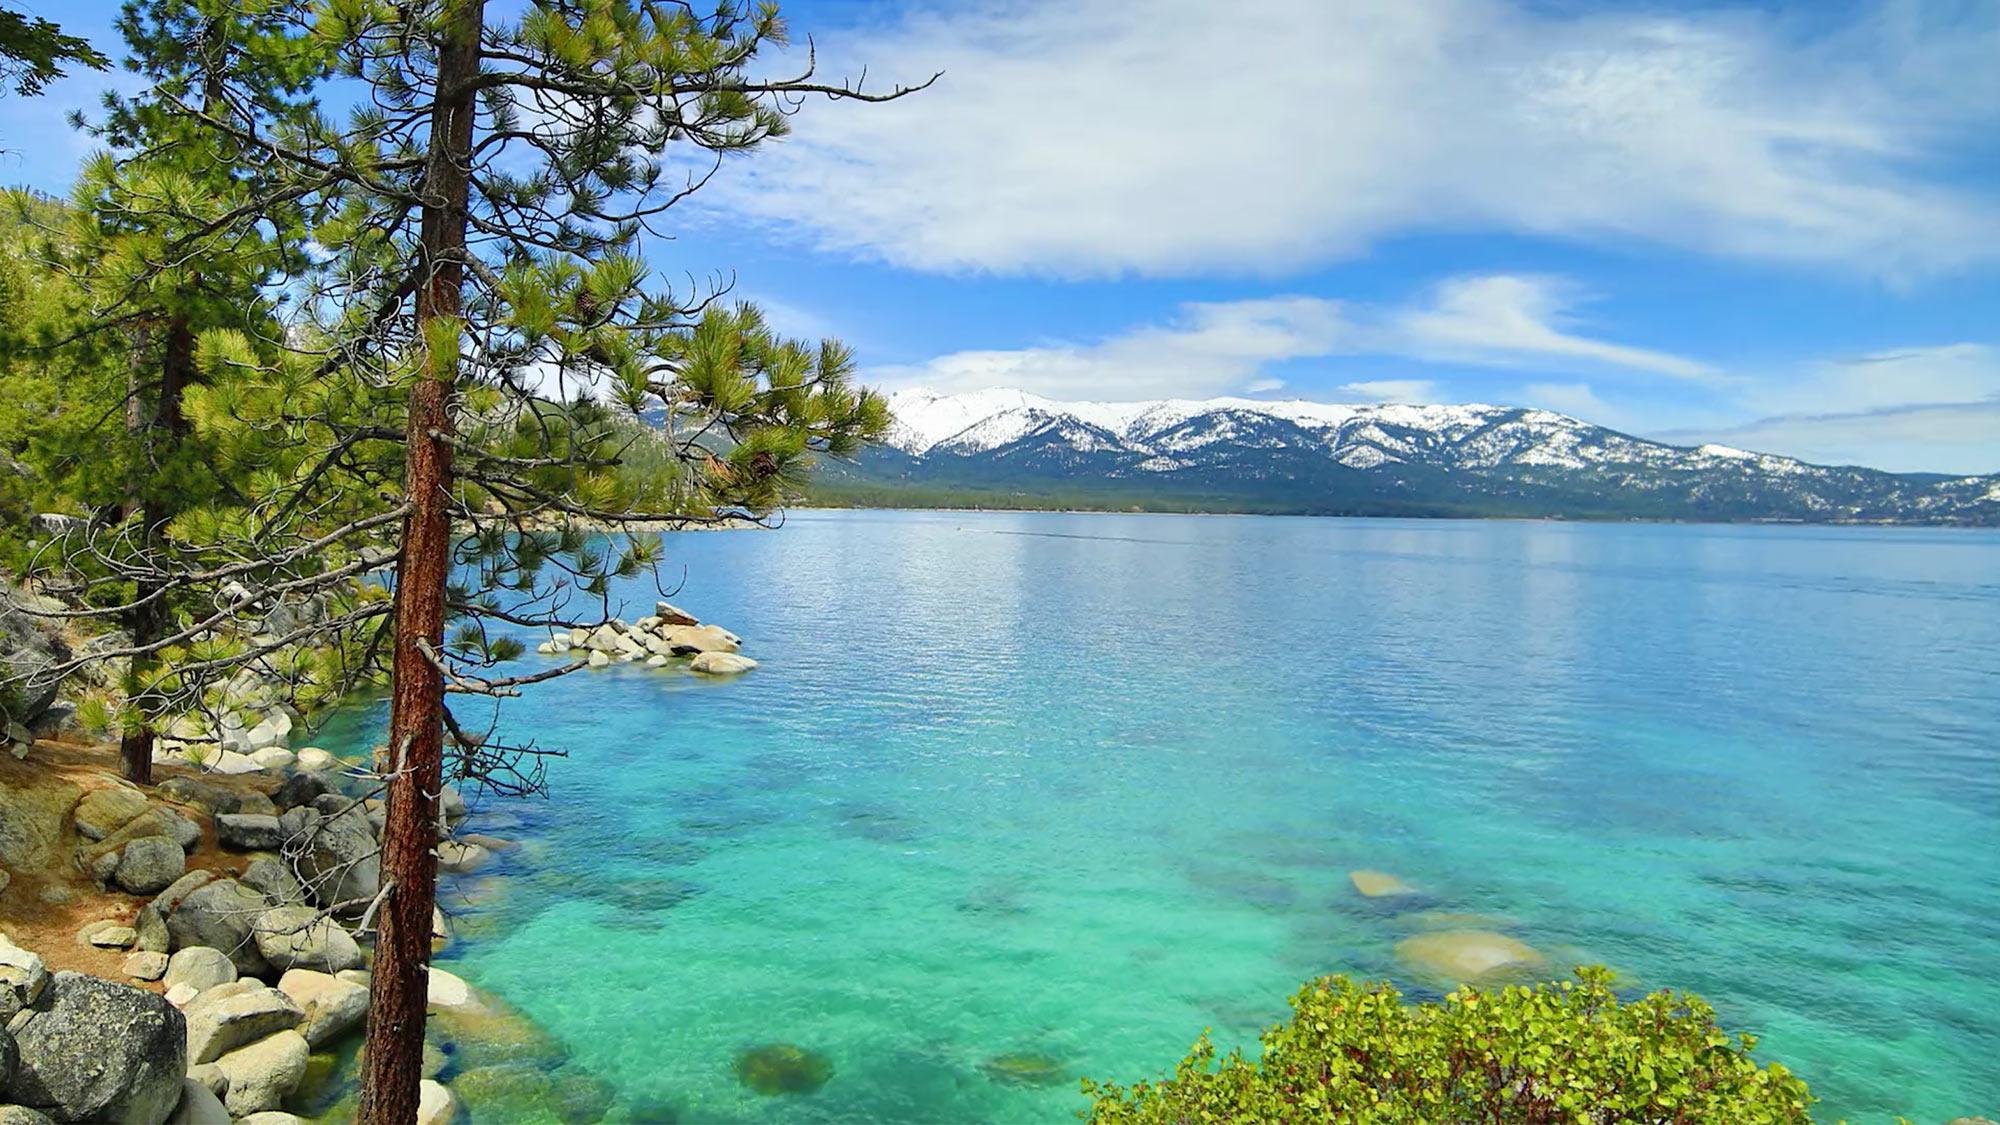 A view of a beautiful bay in lake Tahoe